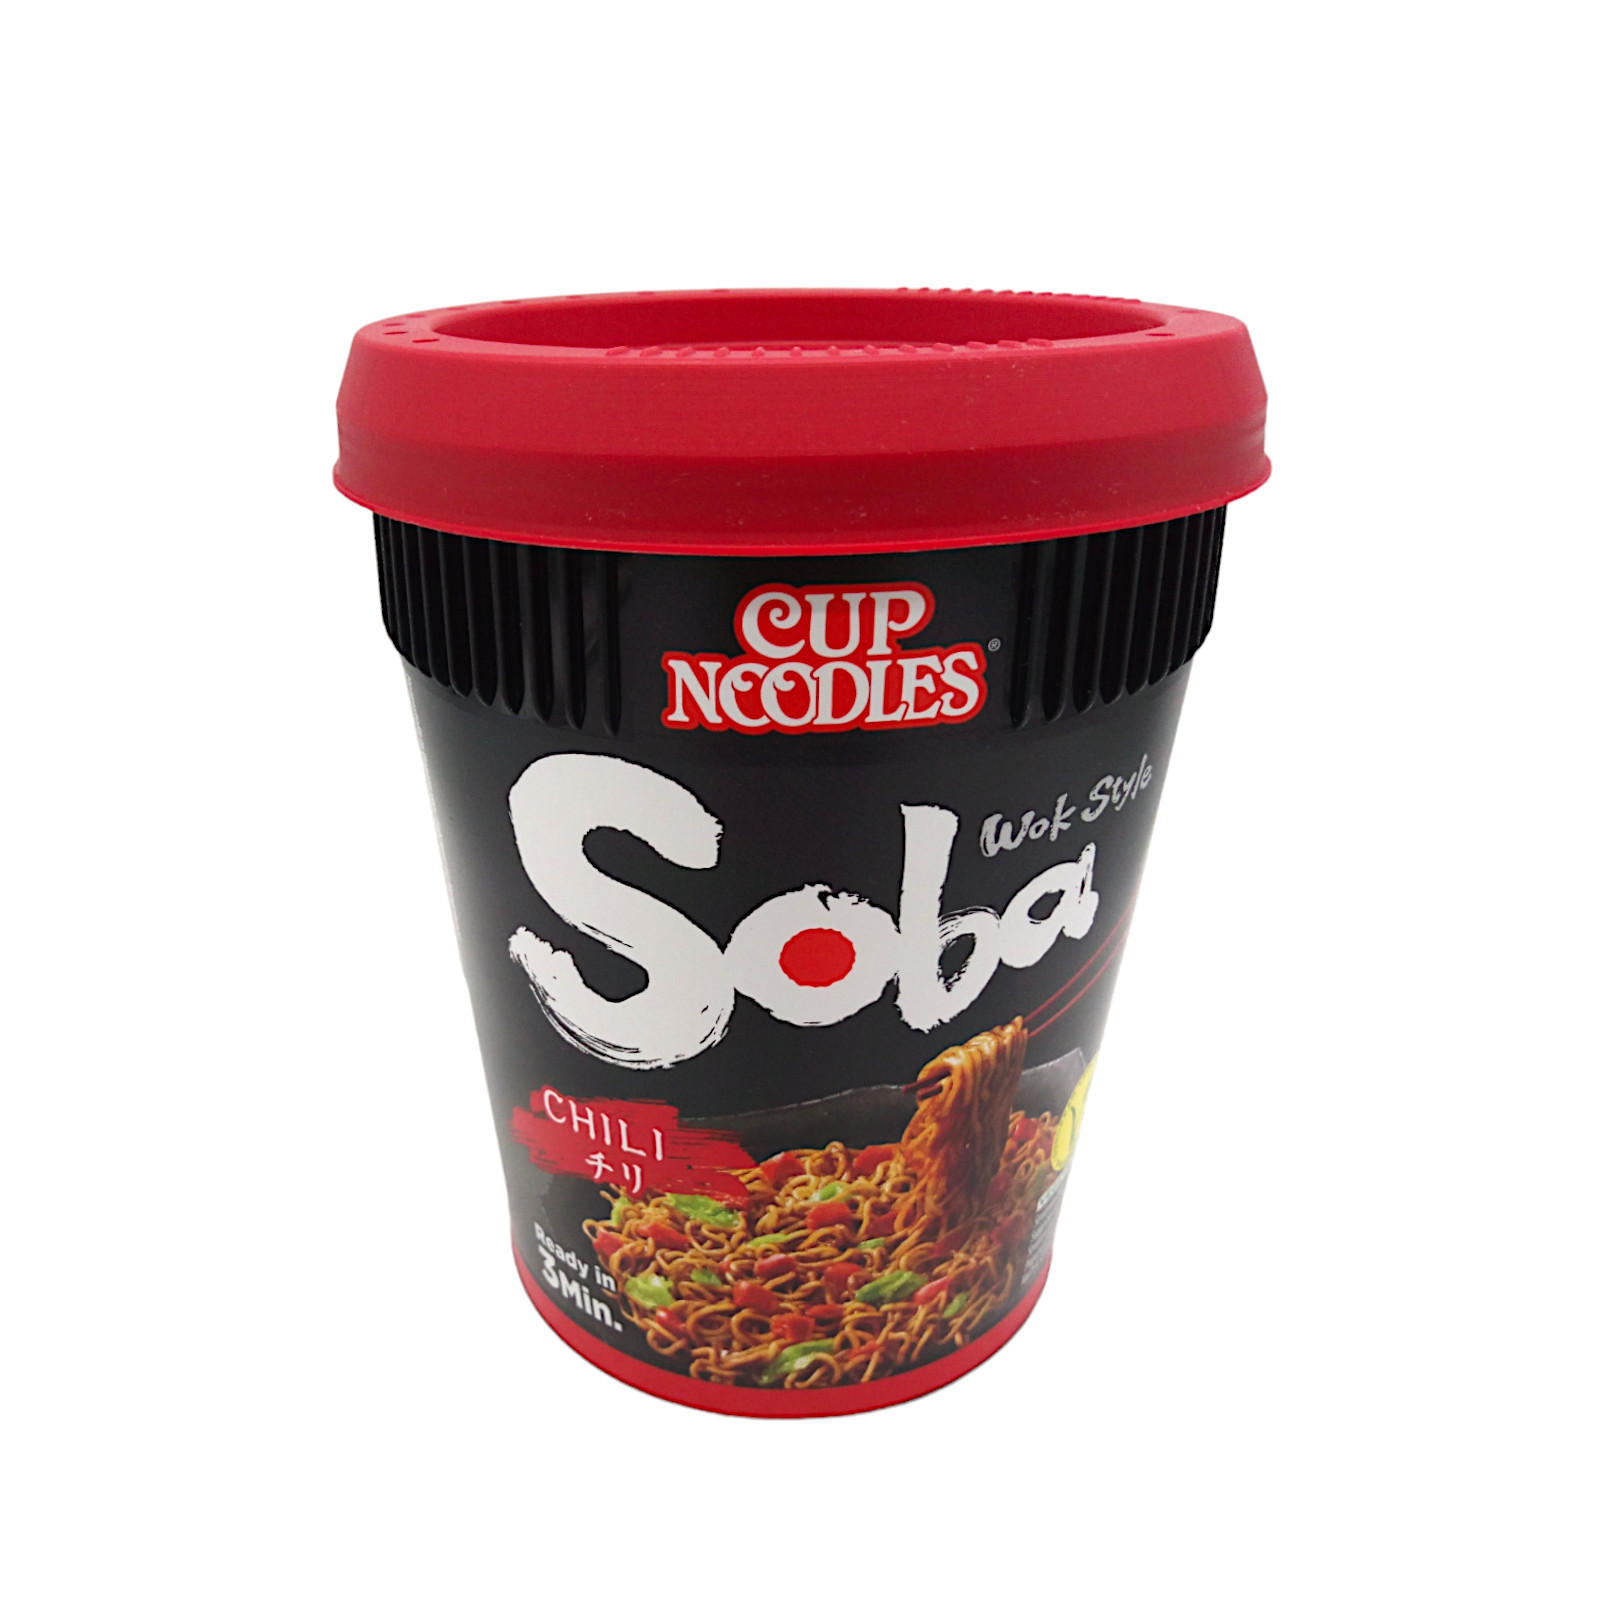 Nissin Soba Cup Chili 92g